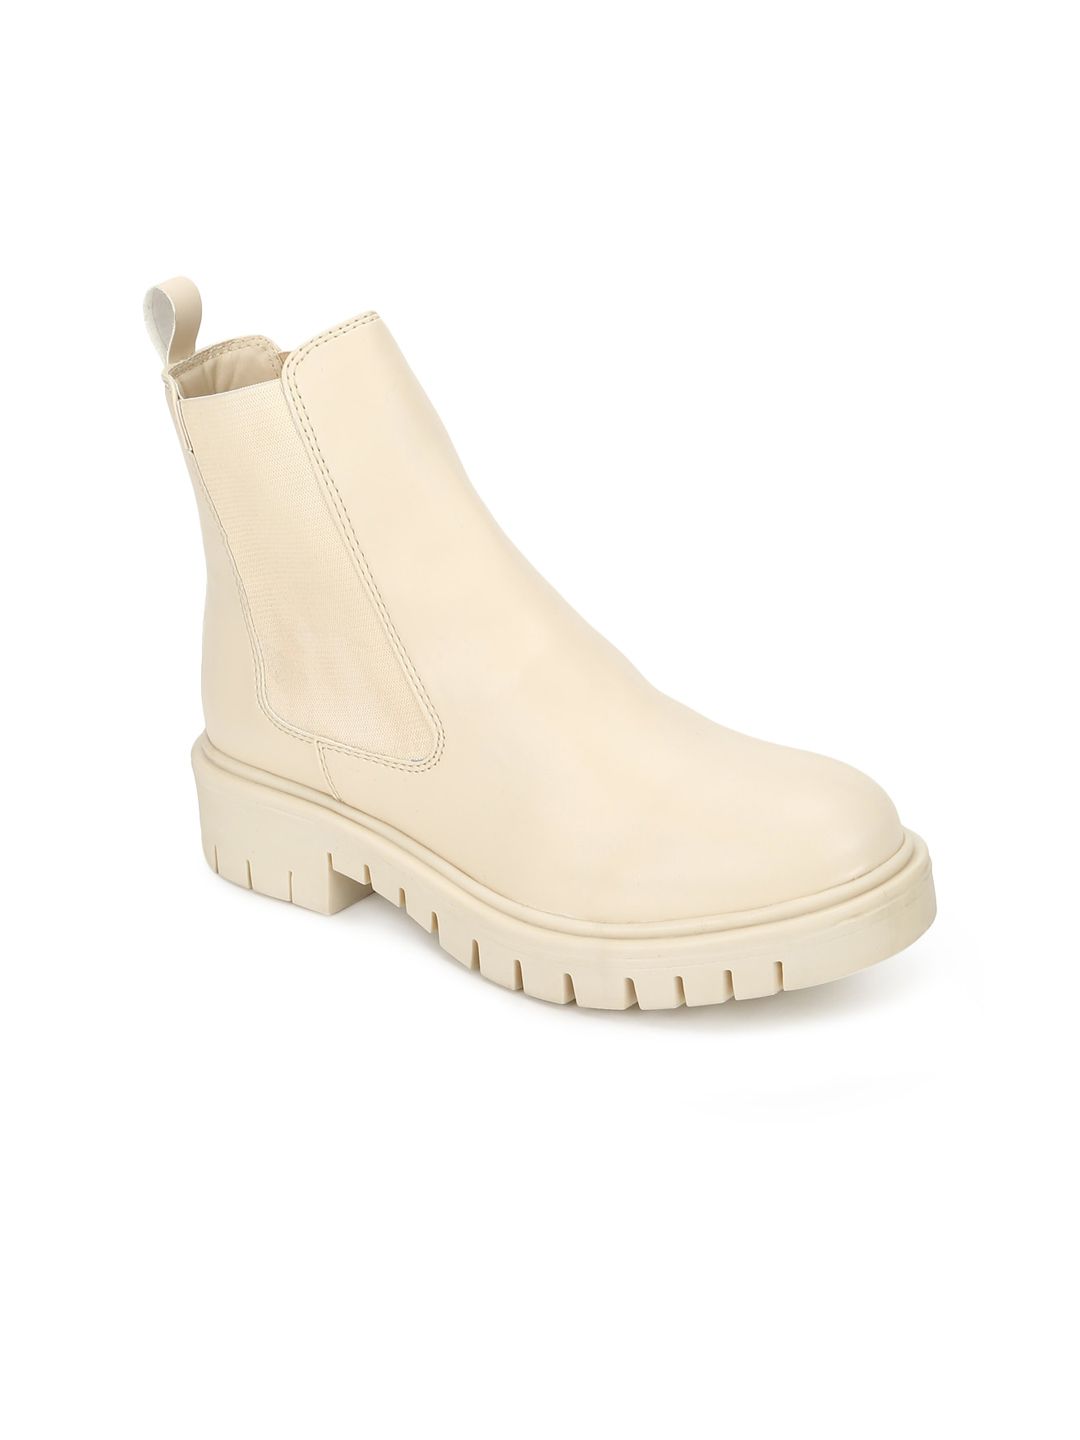 Truffle Collection Cream-Coloured PU Block Heeled Boots Price in India